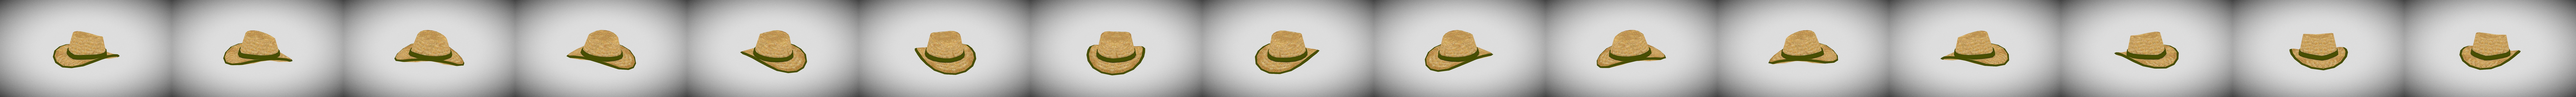 Straw Hat For Roblox Game Buy Royalty Free 3d Model By Catafest Catafest 14ccdf3 - roblox straw hat